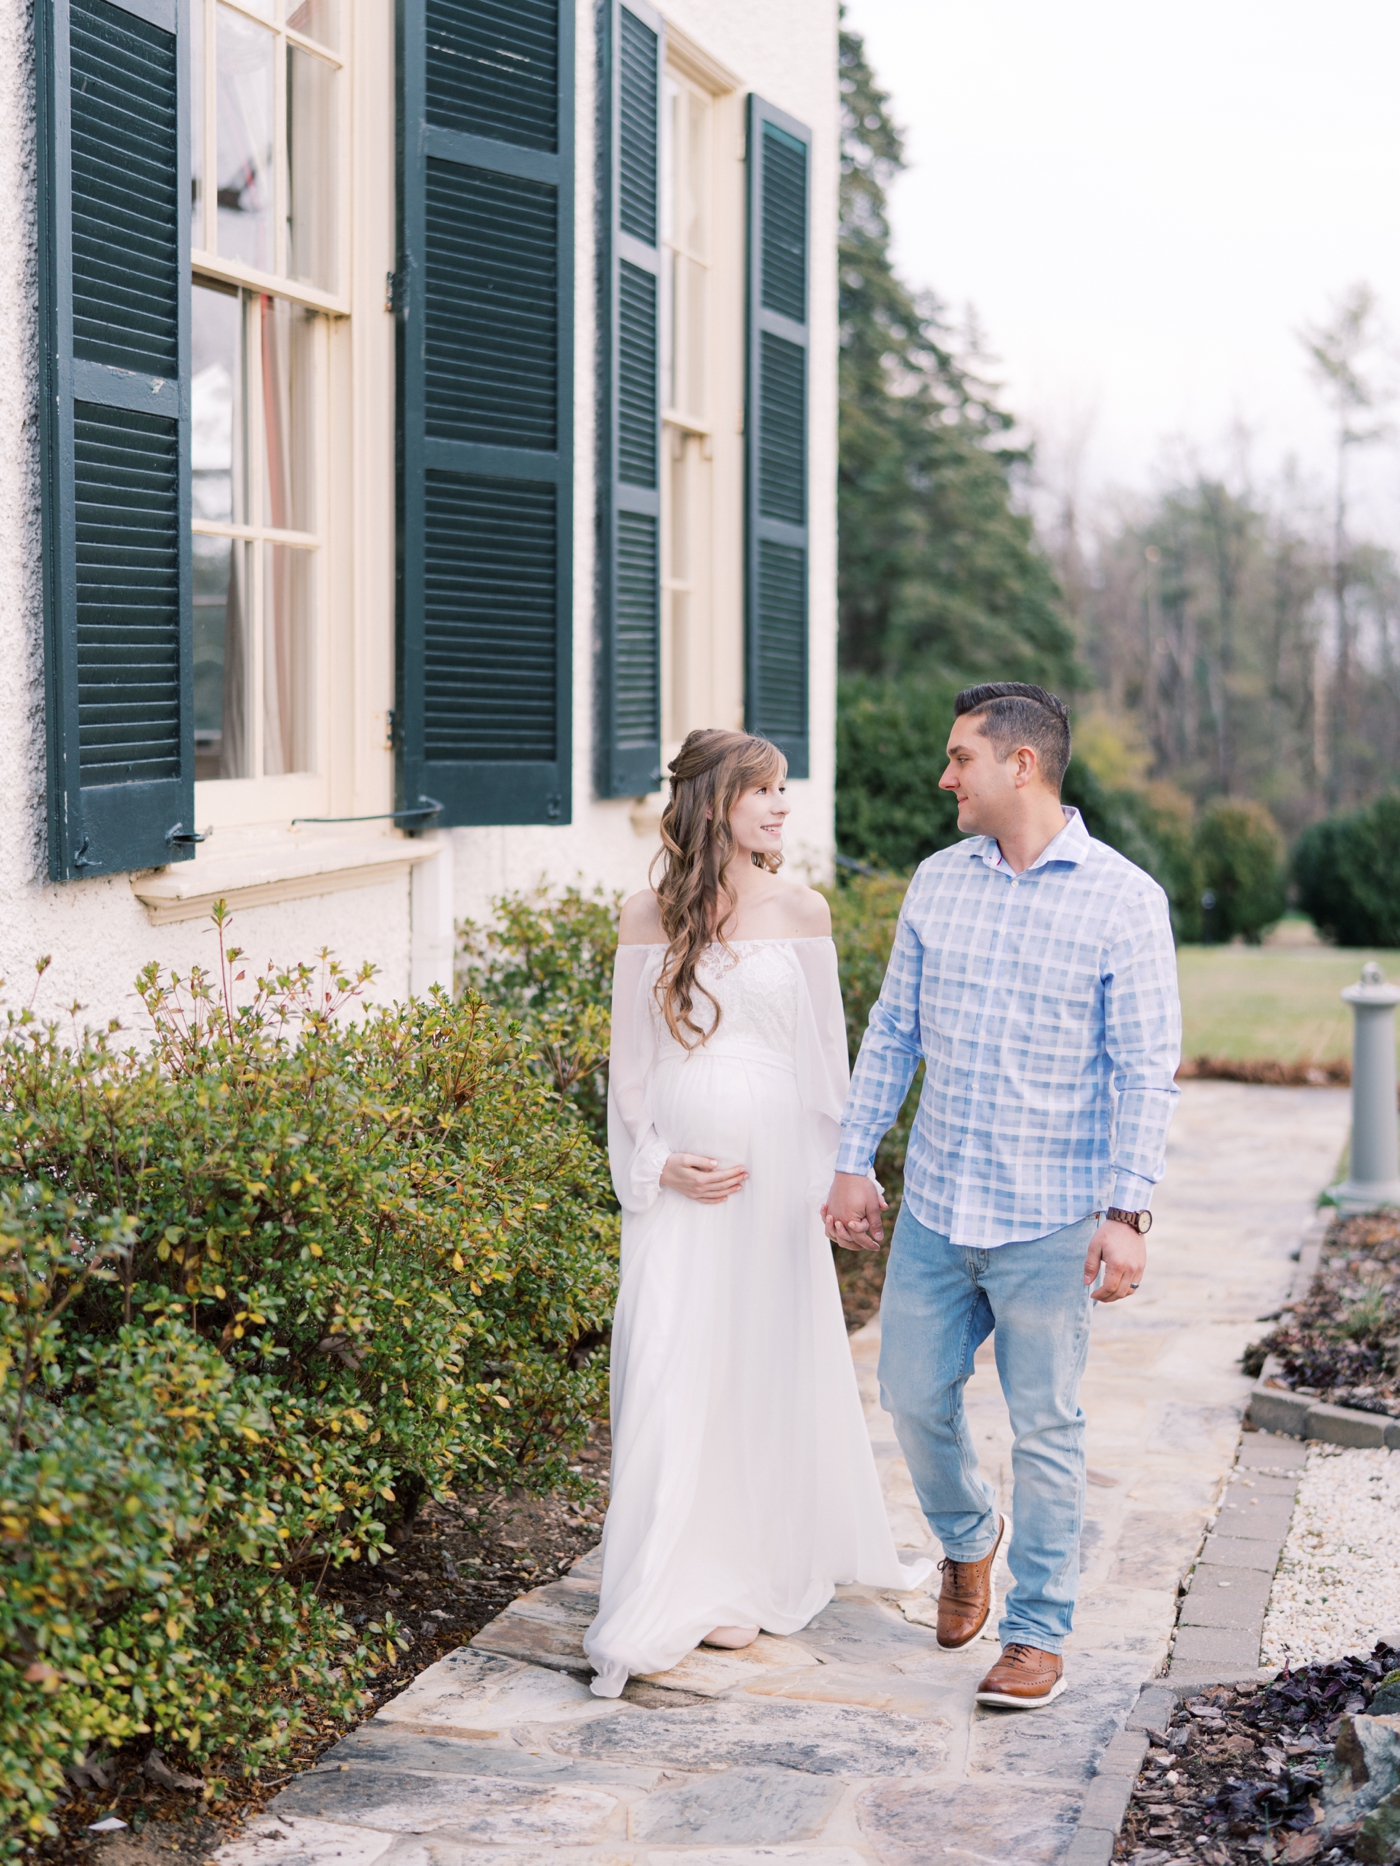 Couple walking holding hands at Rust Manor House in Leesburg Virginia for their maternity session